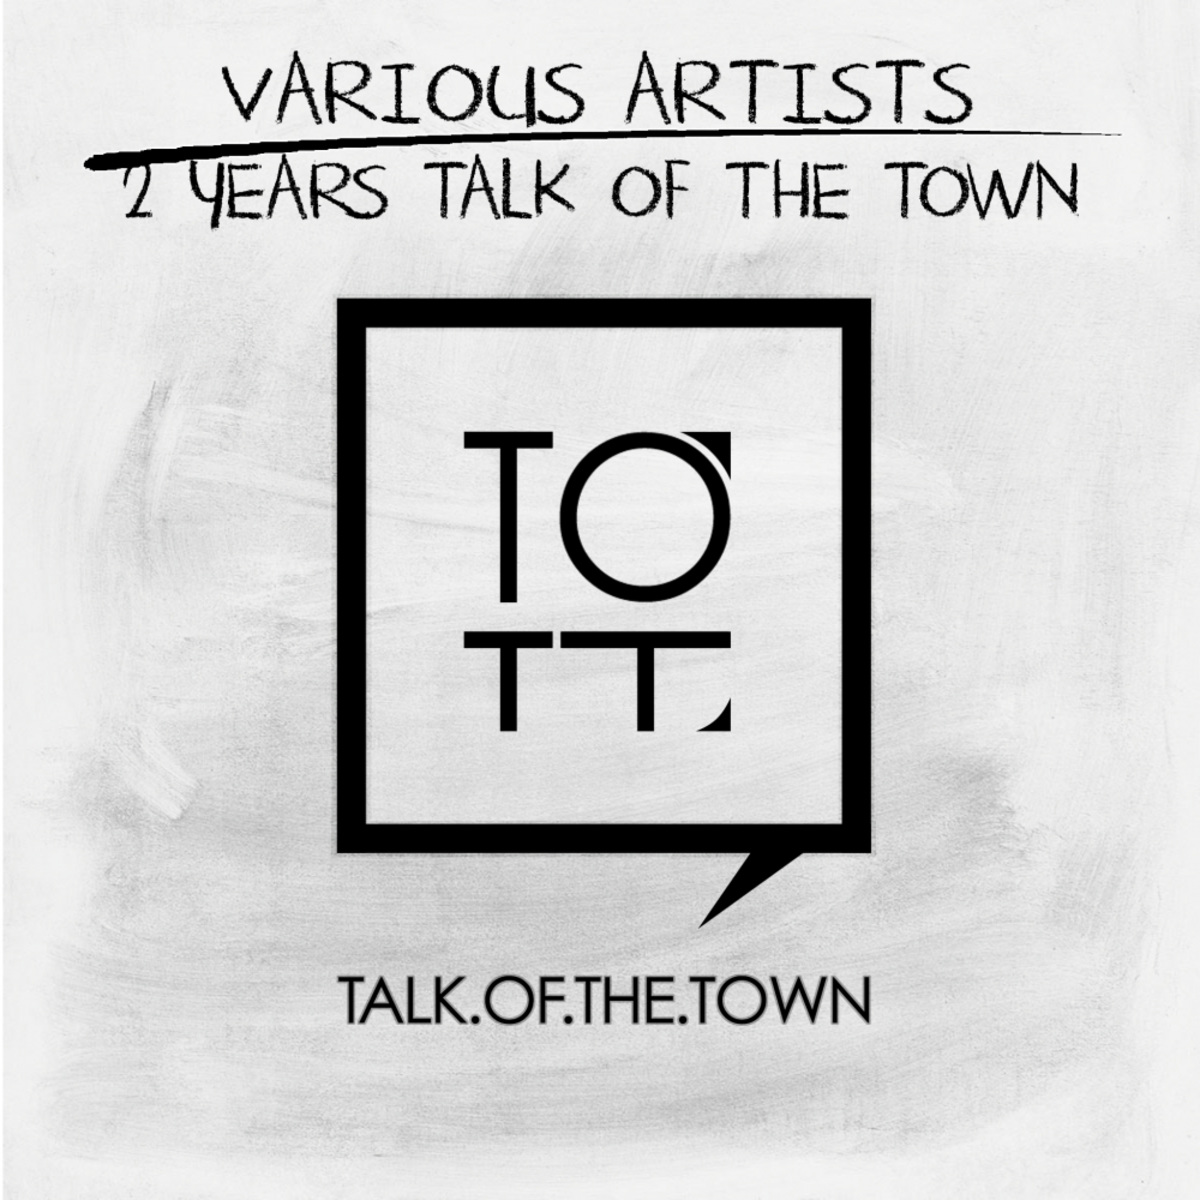 VA - 2 Years Talk of the Town / Talk of the Town